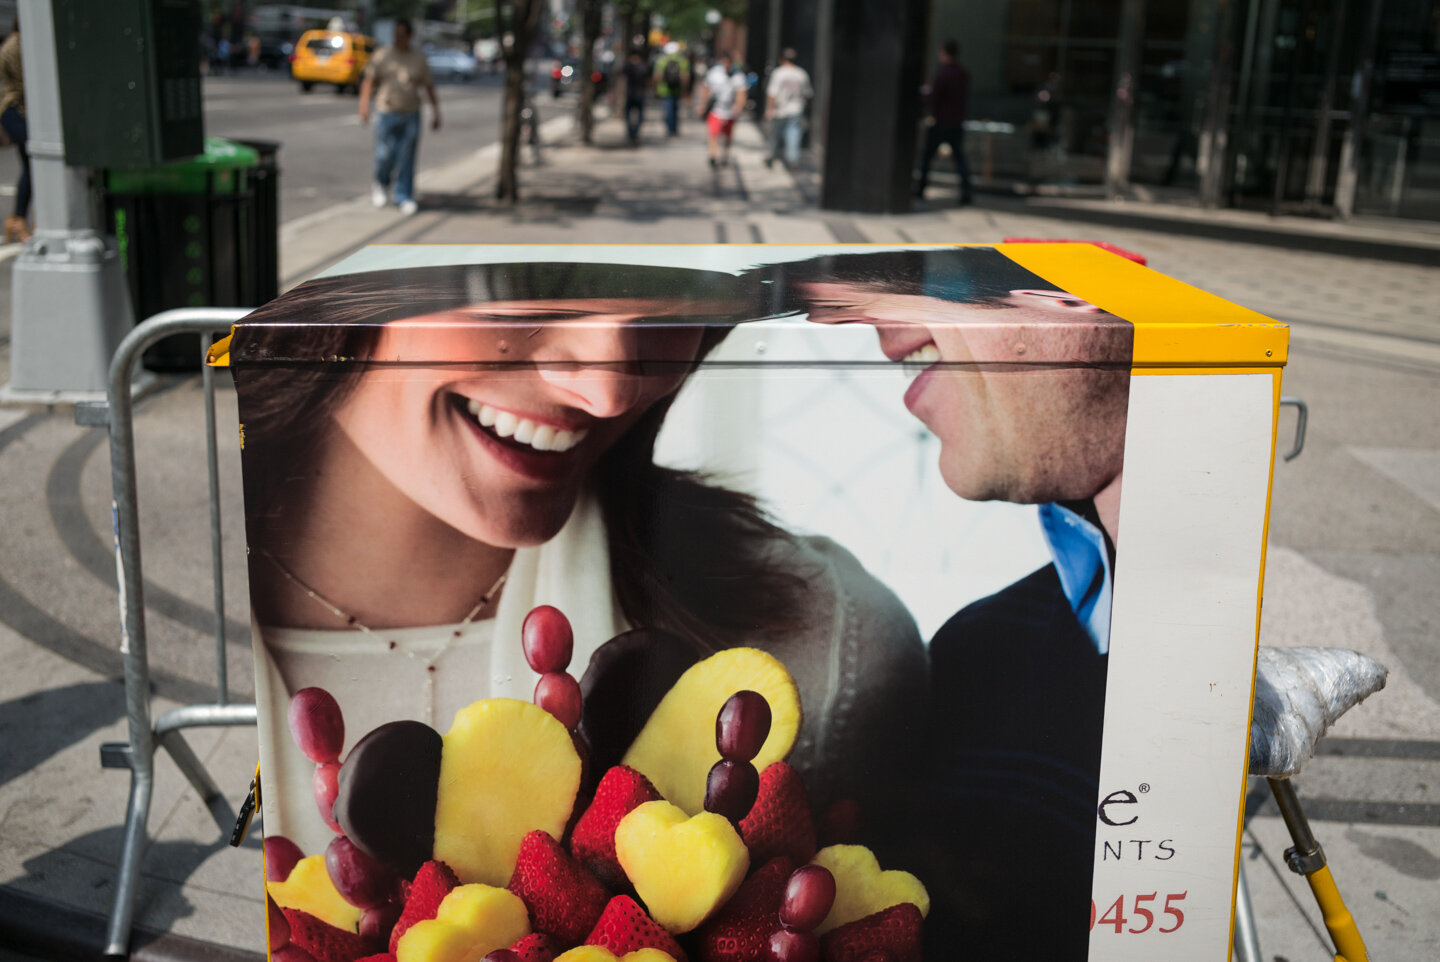 Couple and Fruit. New York, New York 2014